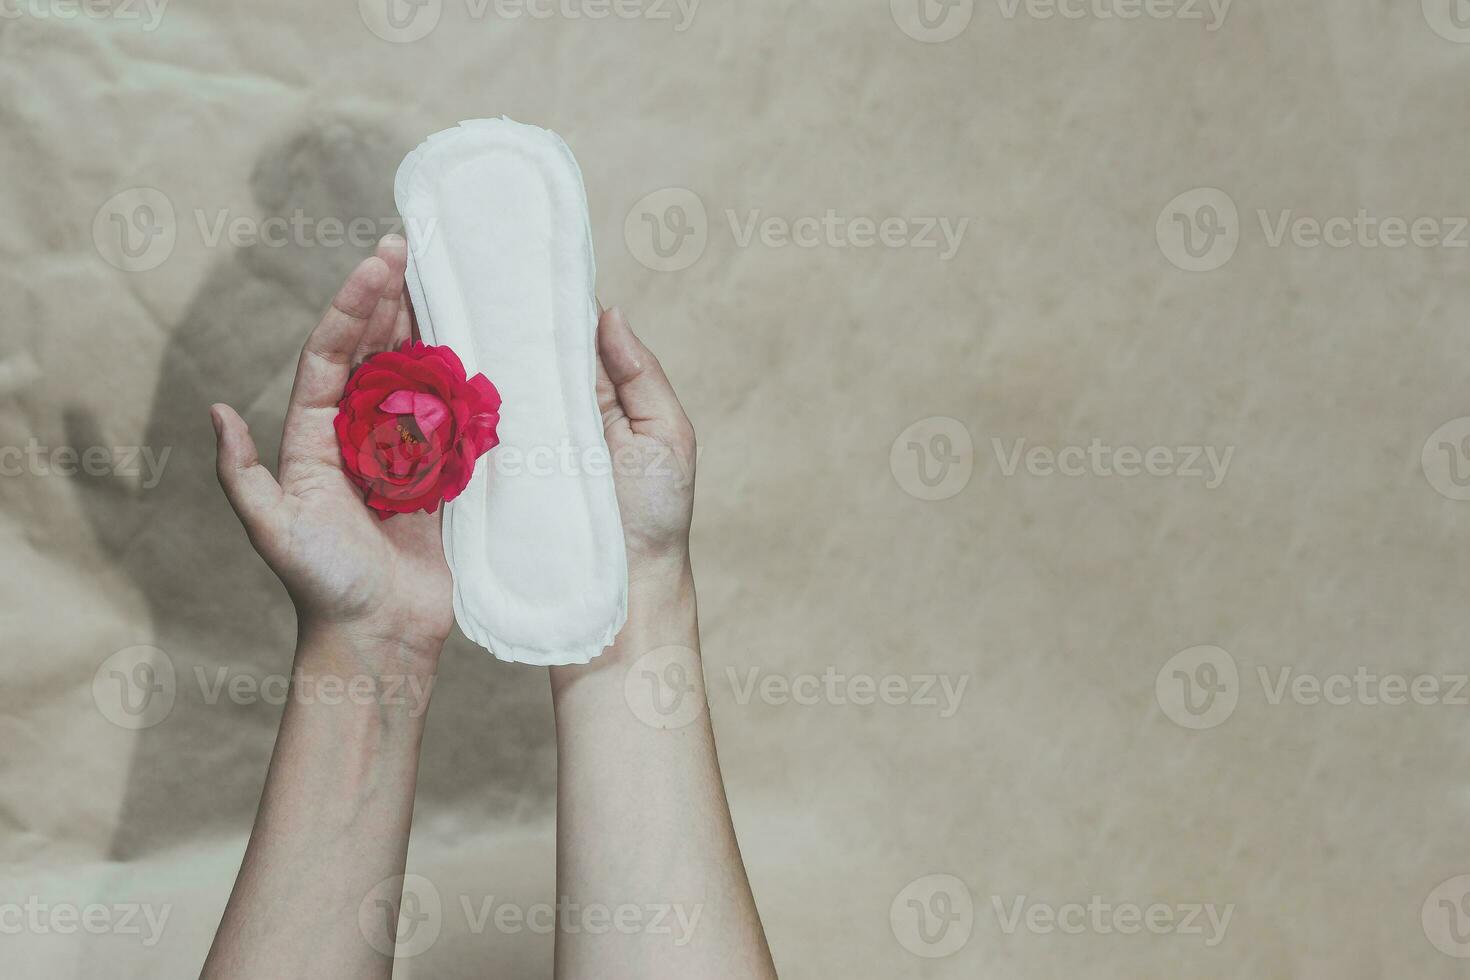 Female's hand holding sanitary napkins with red rose on it. Period days concept showing feminine menstrual cycle photo